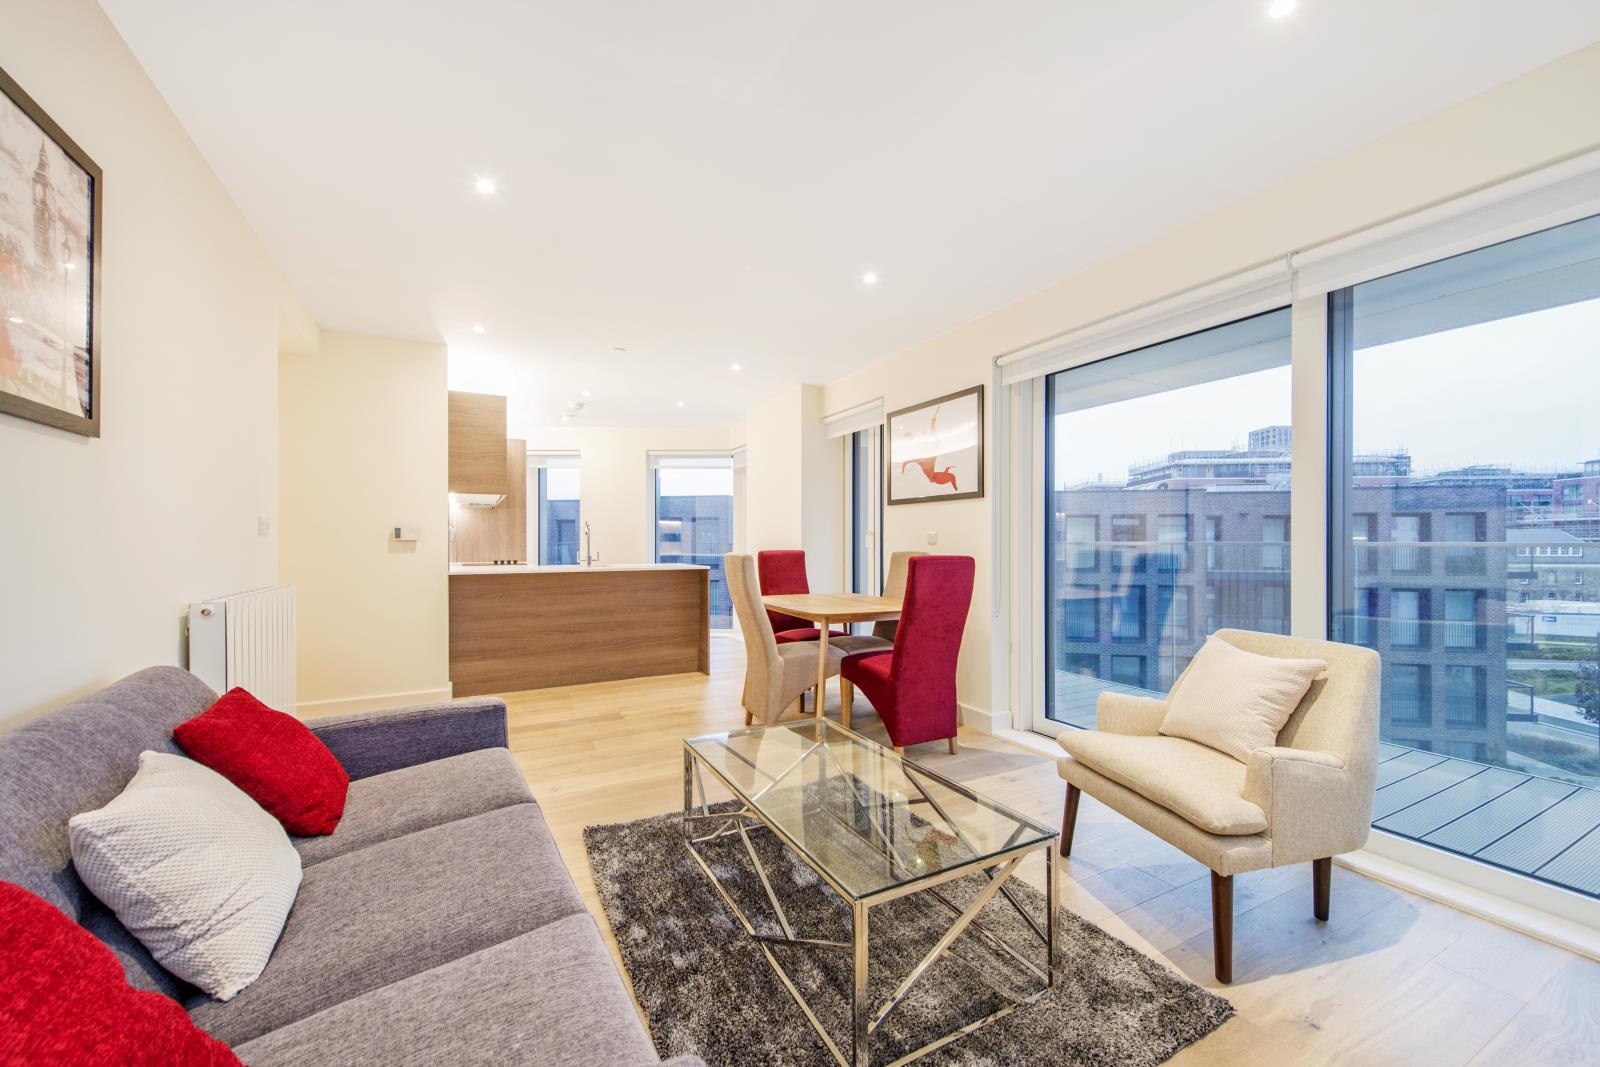 2 bedroom apartment in london for sale